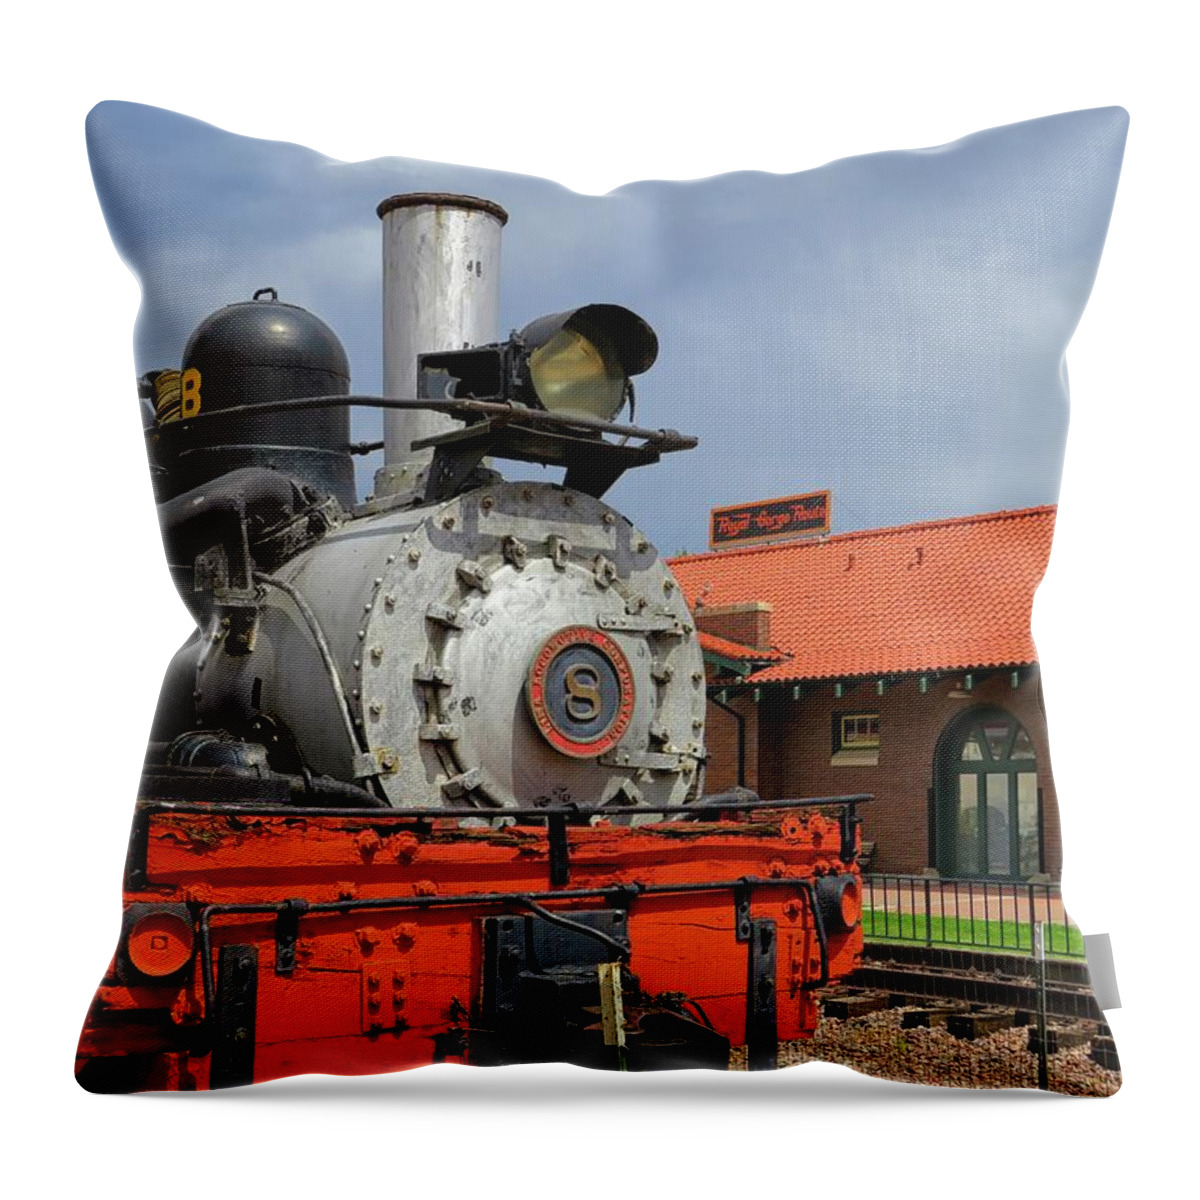 Shay Locomotive Throw Pillow featuring the photograph Shay Locomotive by Connor Beekman